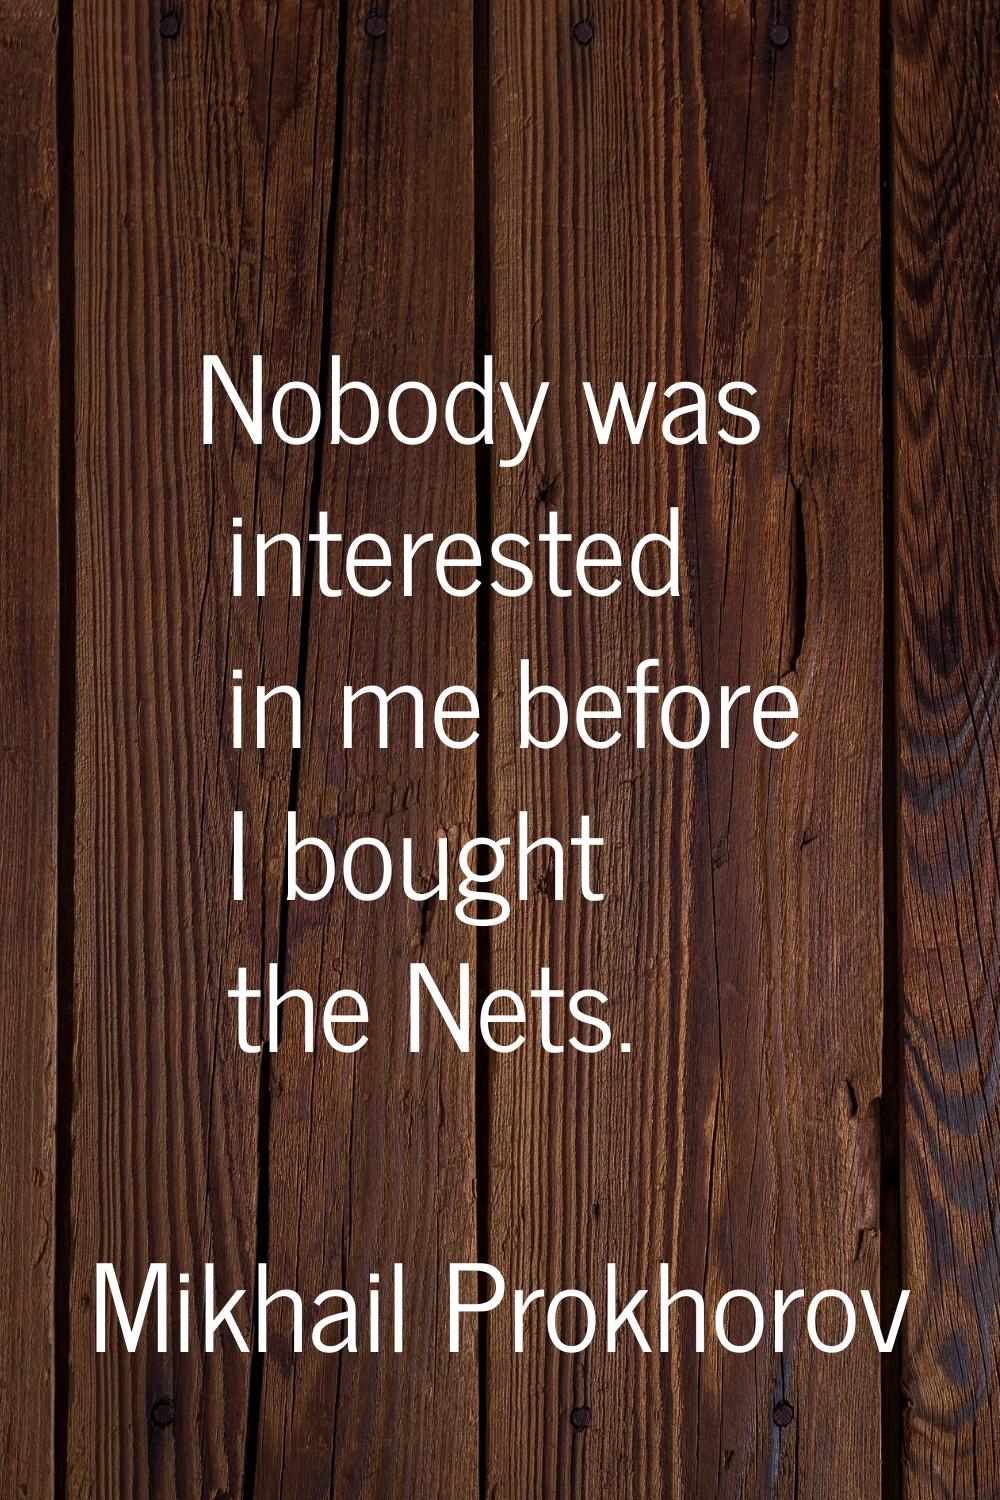 Nobody was interested in me before I bought the Nets.